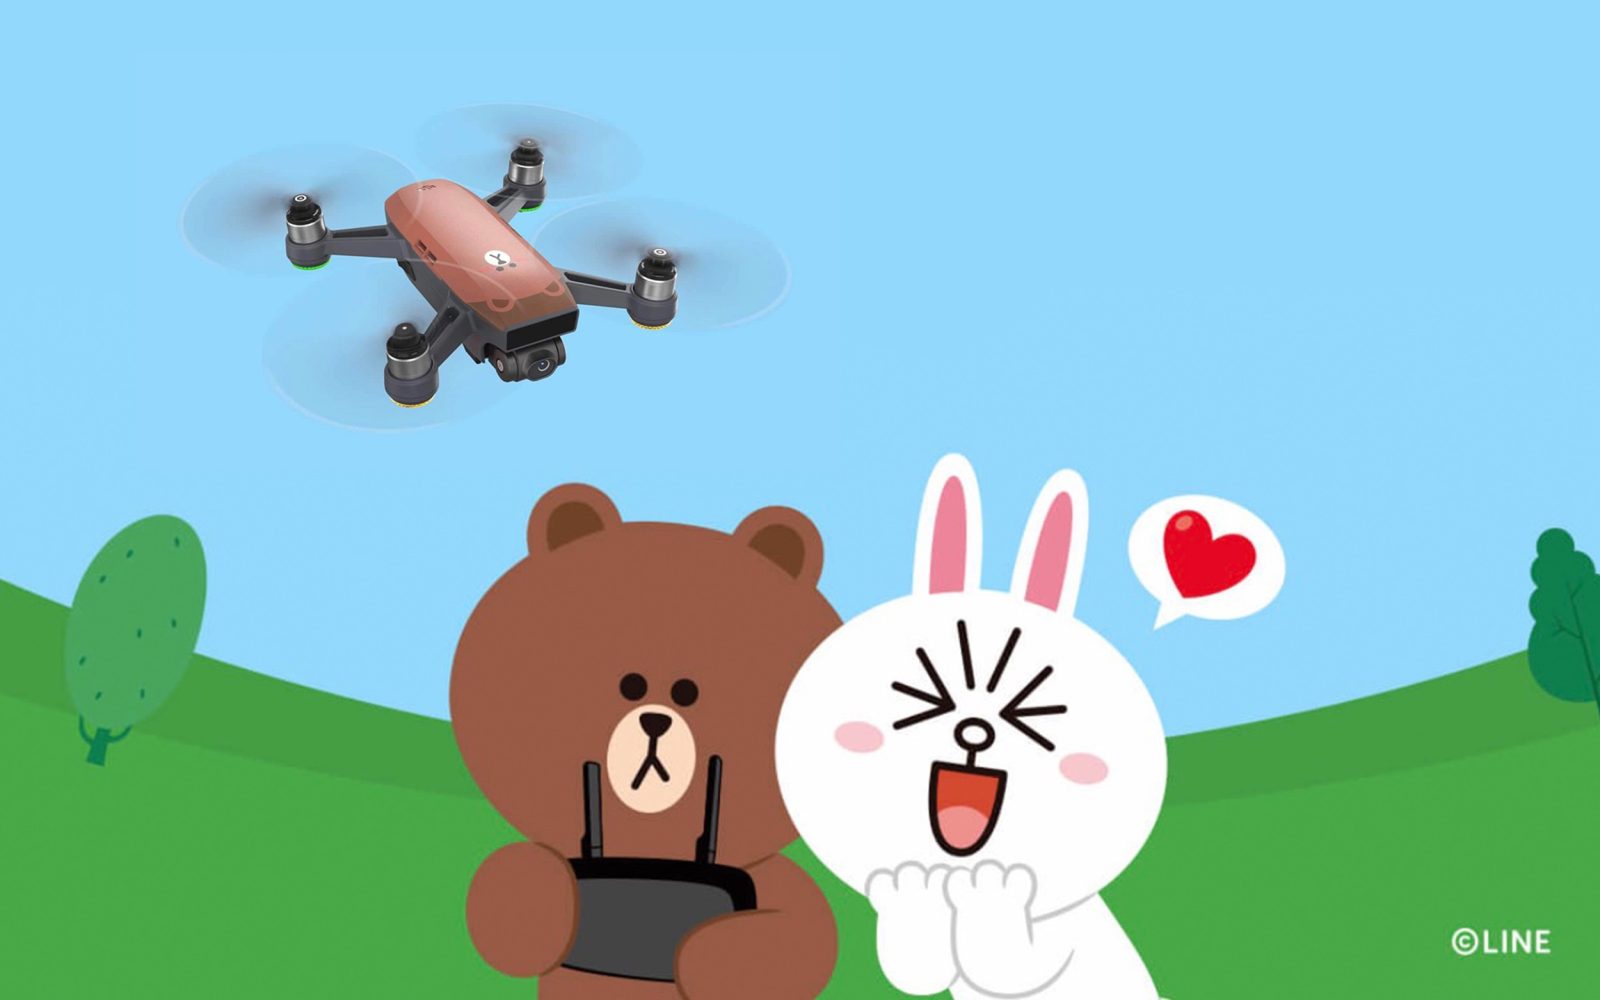 DJI Spark - DJI has teamed up with Line Friends to create brown Spark mini-drone0006